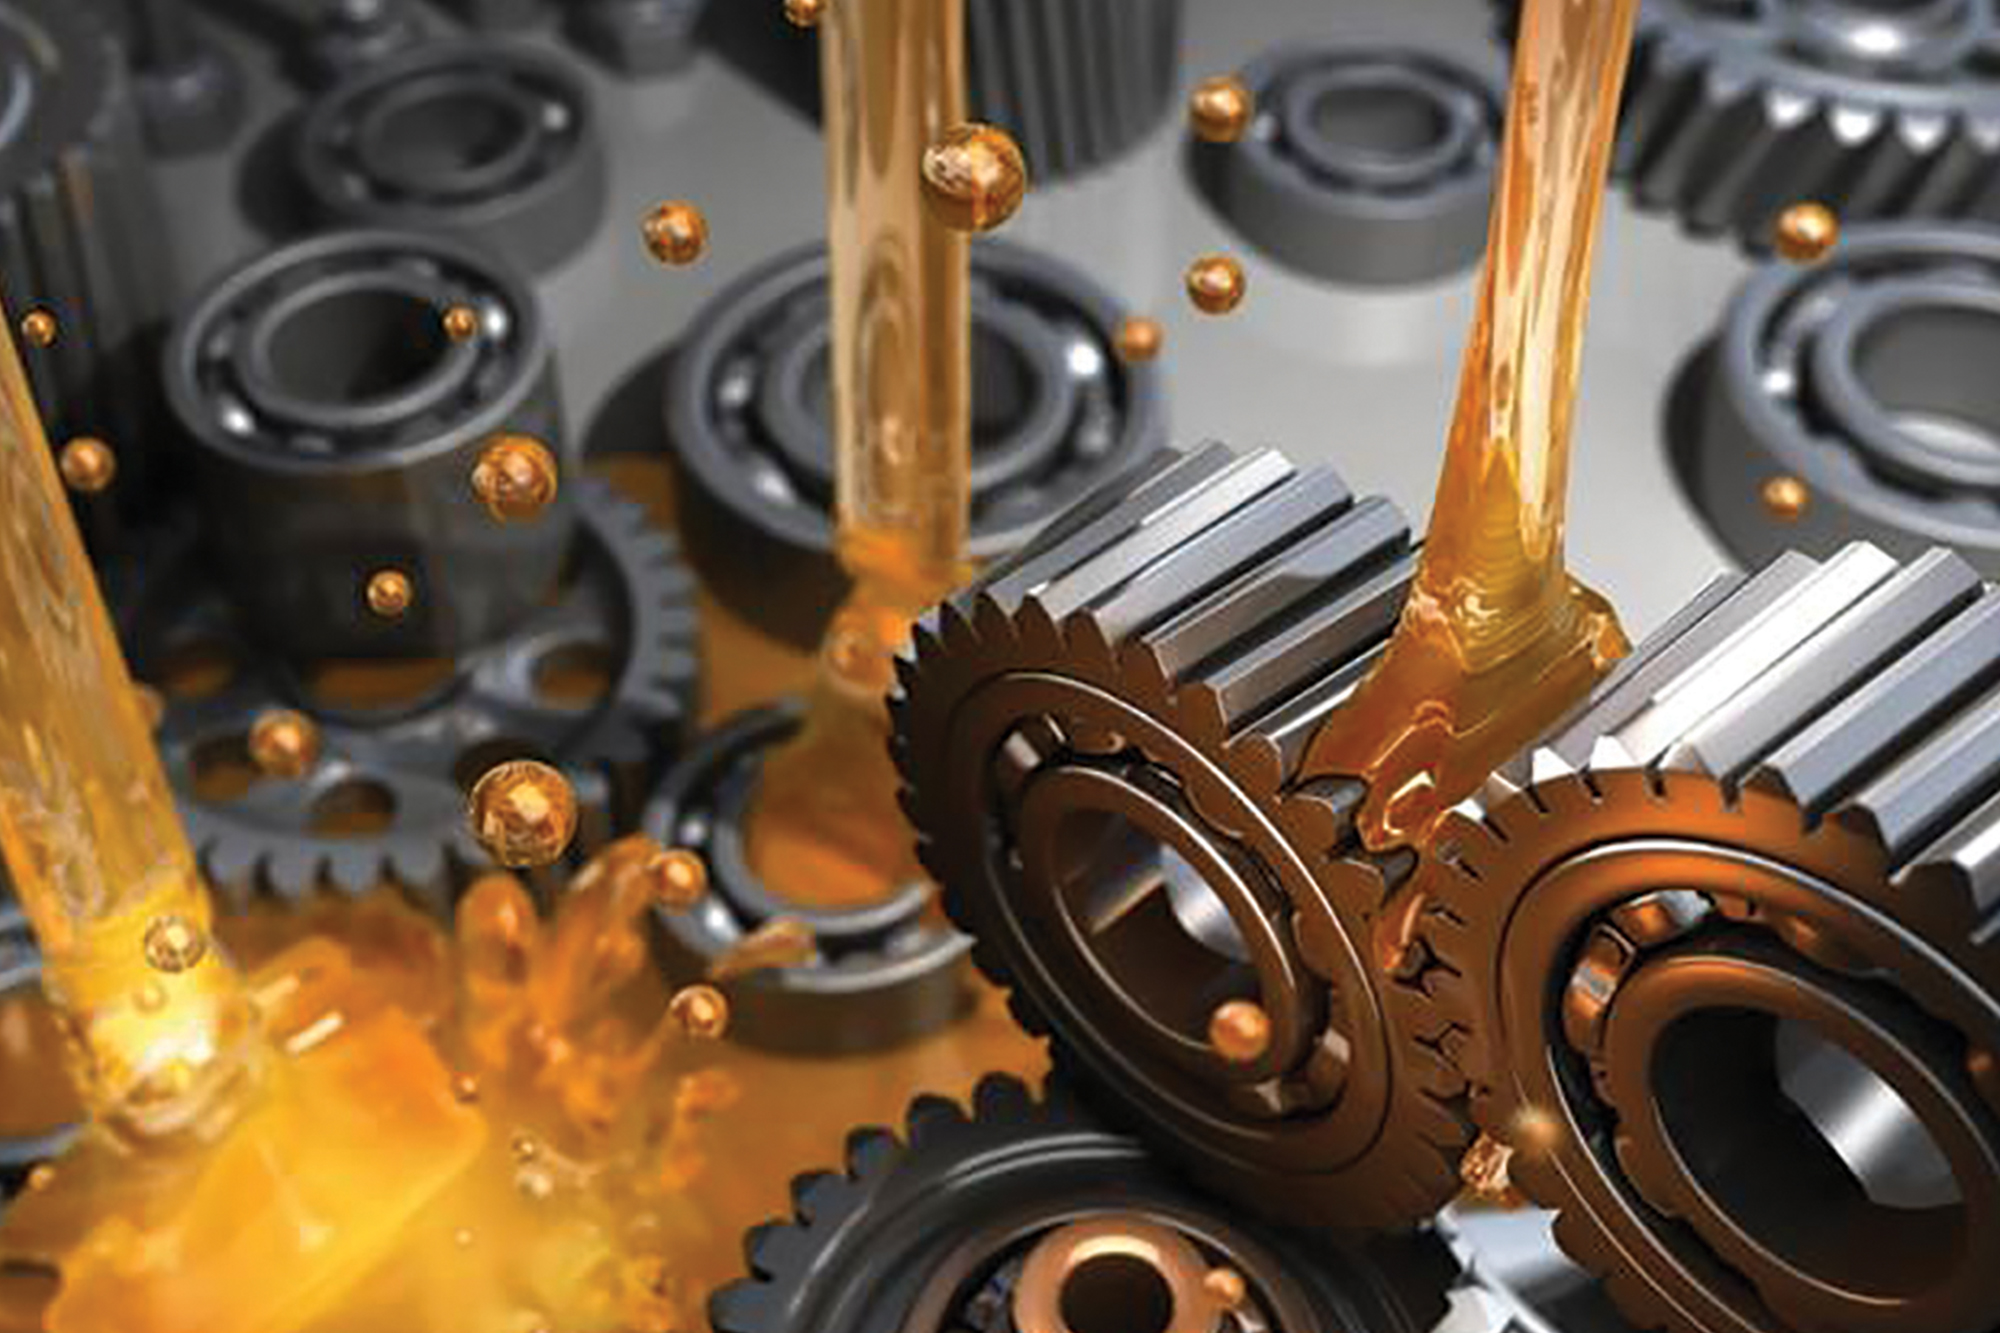 Advanced-formulated lubricants are in demand